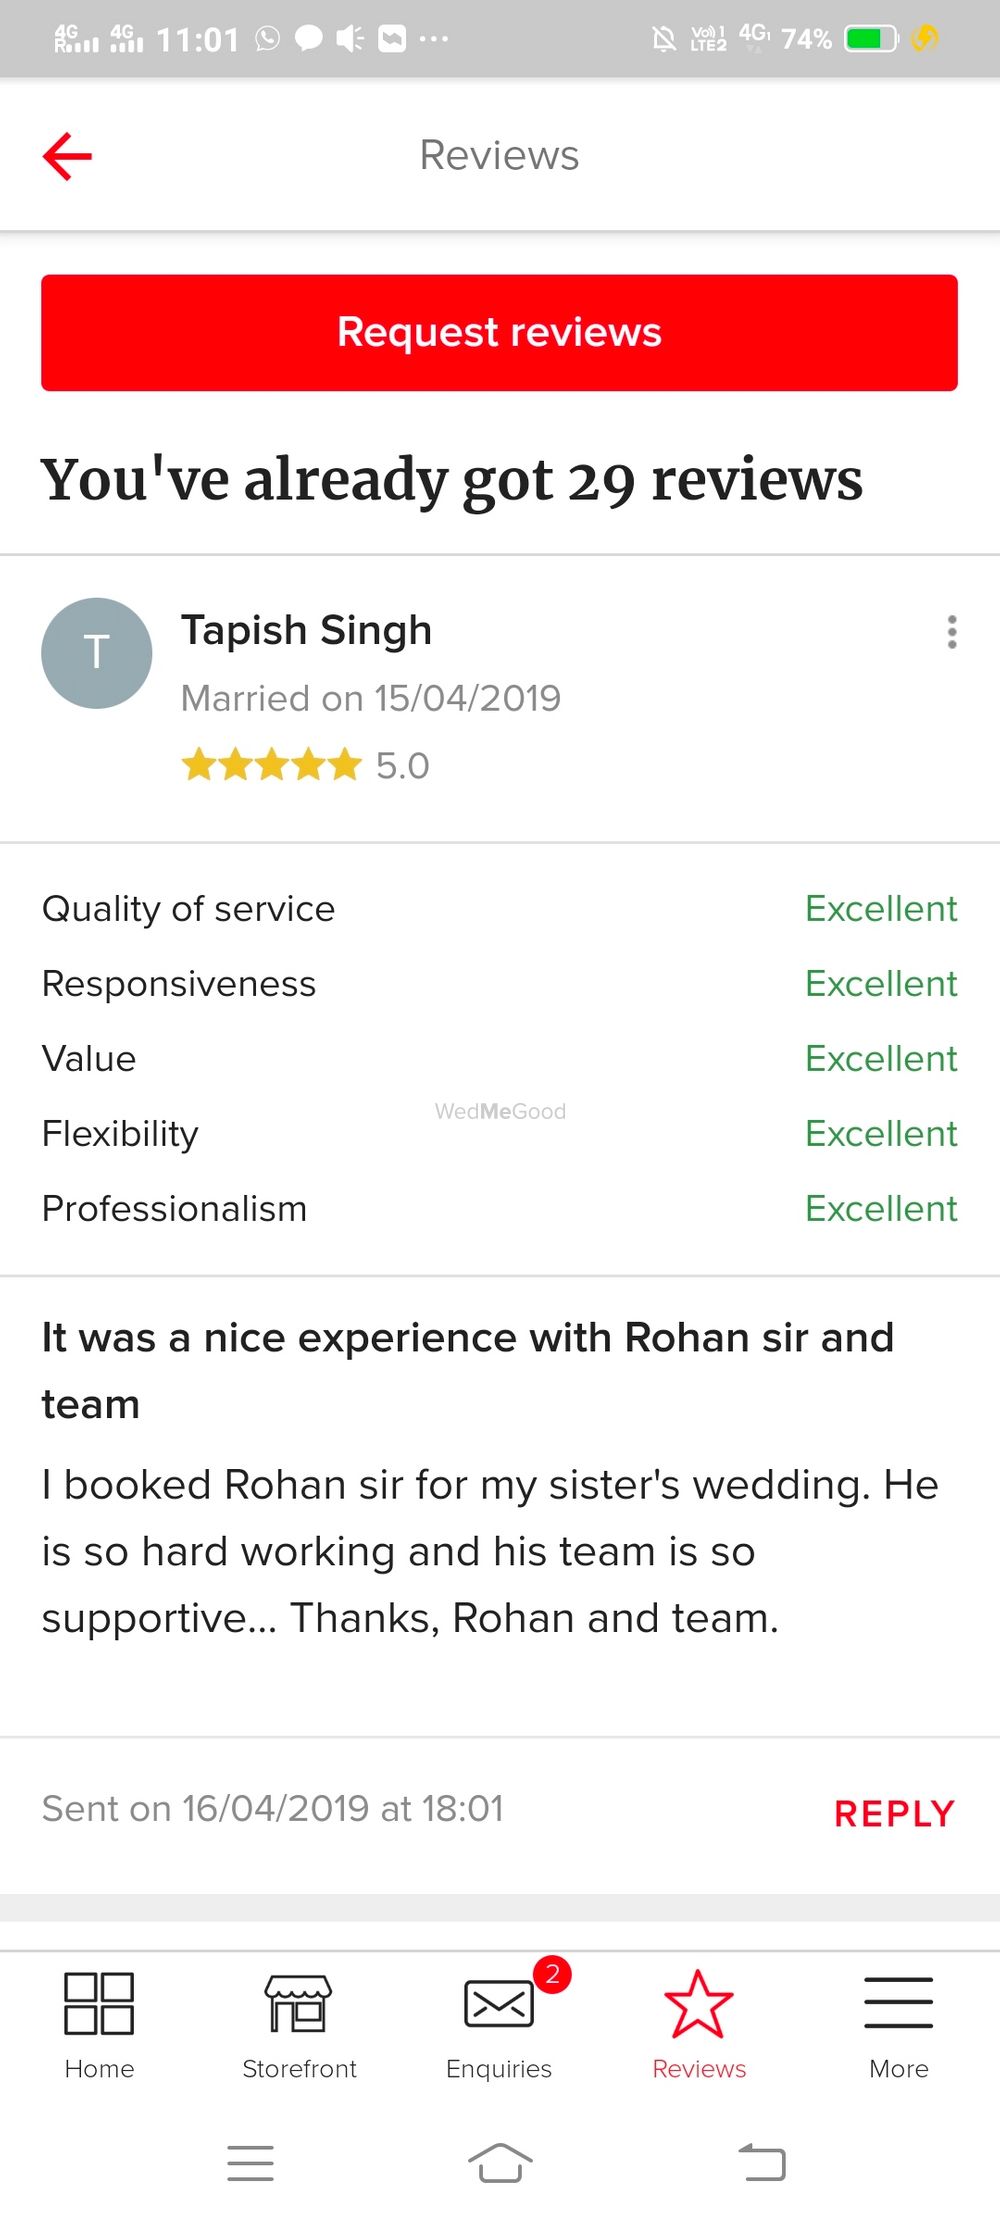 Photo From Reviews - By Rohan Dance and Wedding Choreography